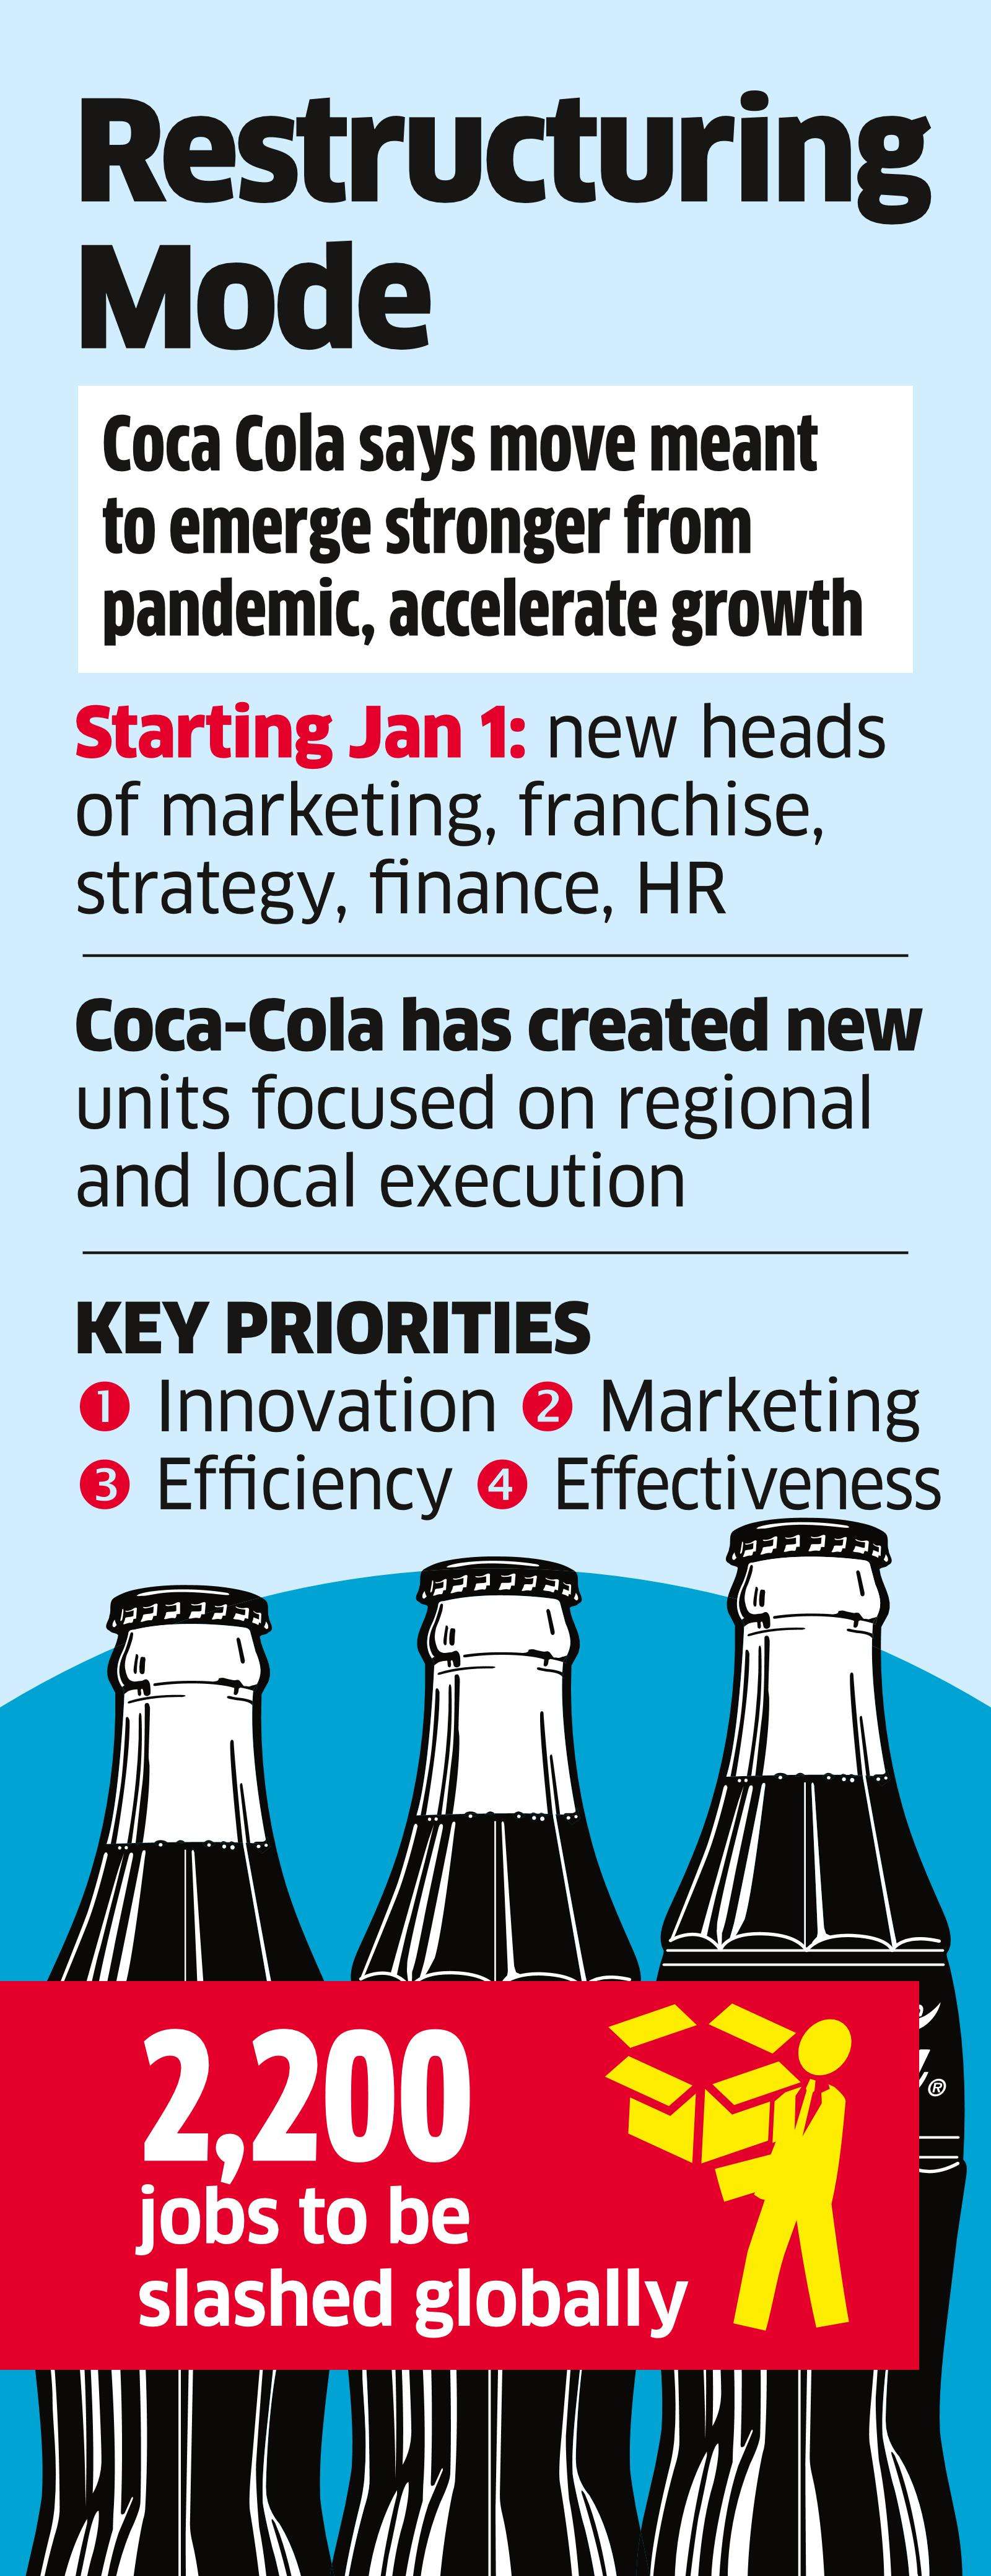 coca cola: Pharma sales channel emerges as new 'superstar' for Coca-Cola  during pandemic - The Economic Times